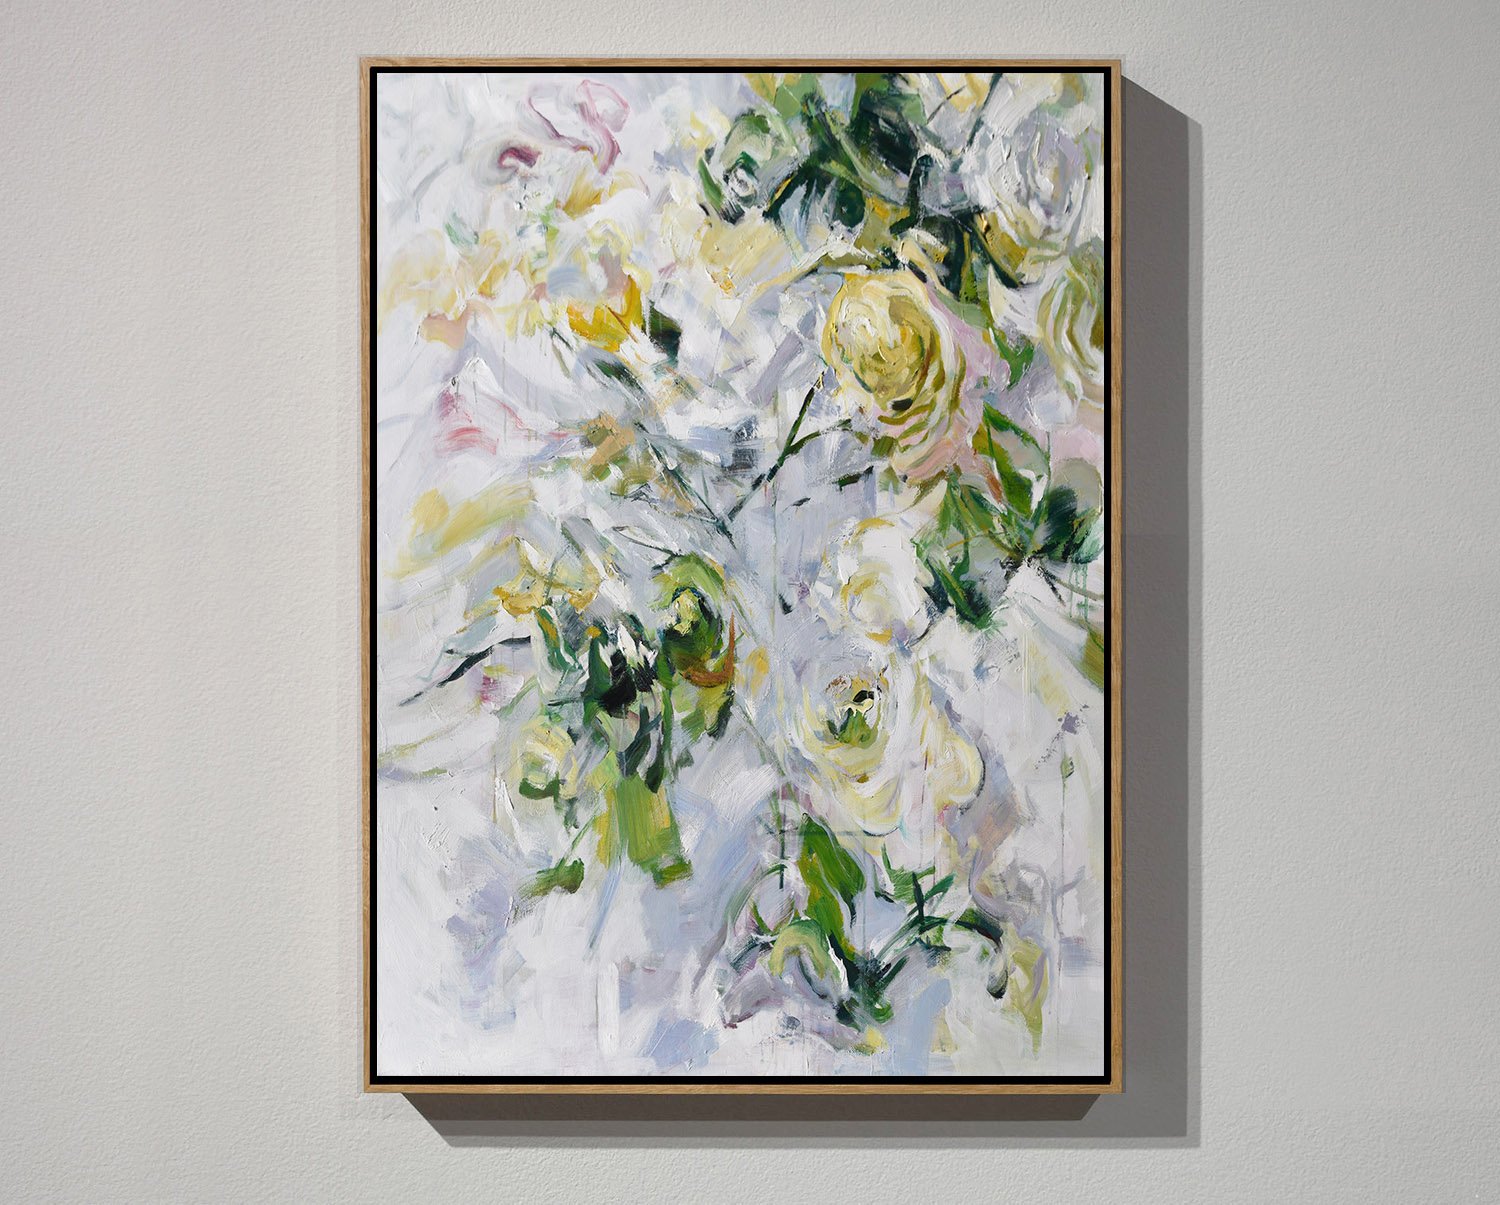 Hand-Painted Oversized Abstract Flower Oil Painting, Original Art, Painting On Canvas - Oil Painting On Canvas Reading Room Large